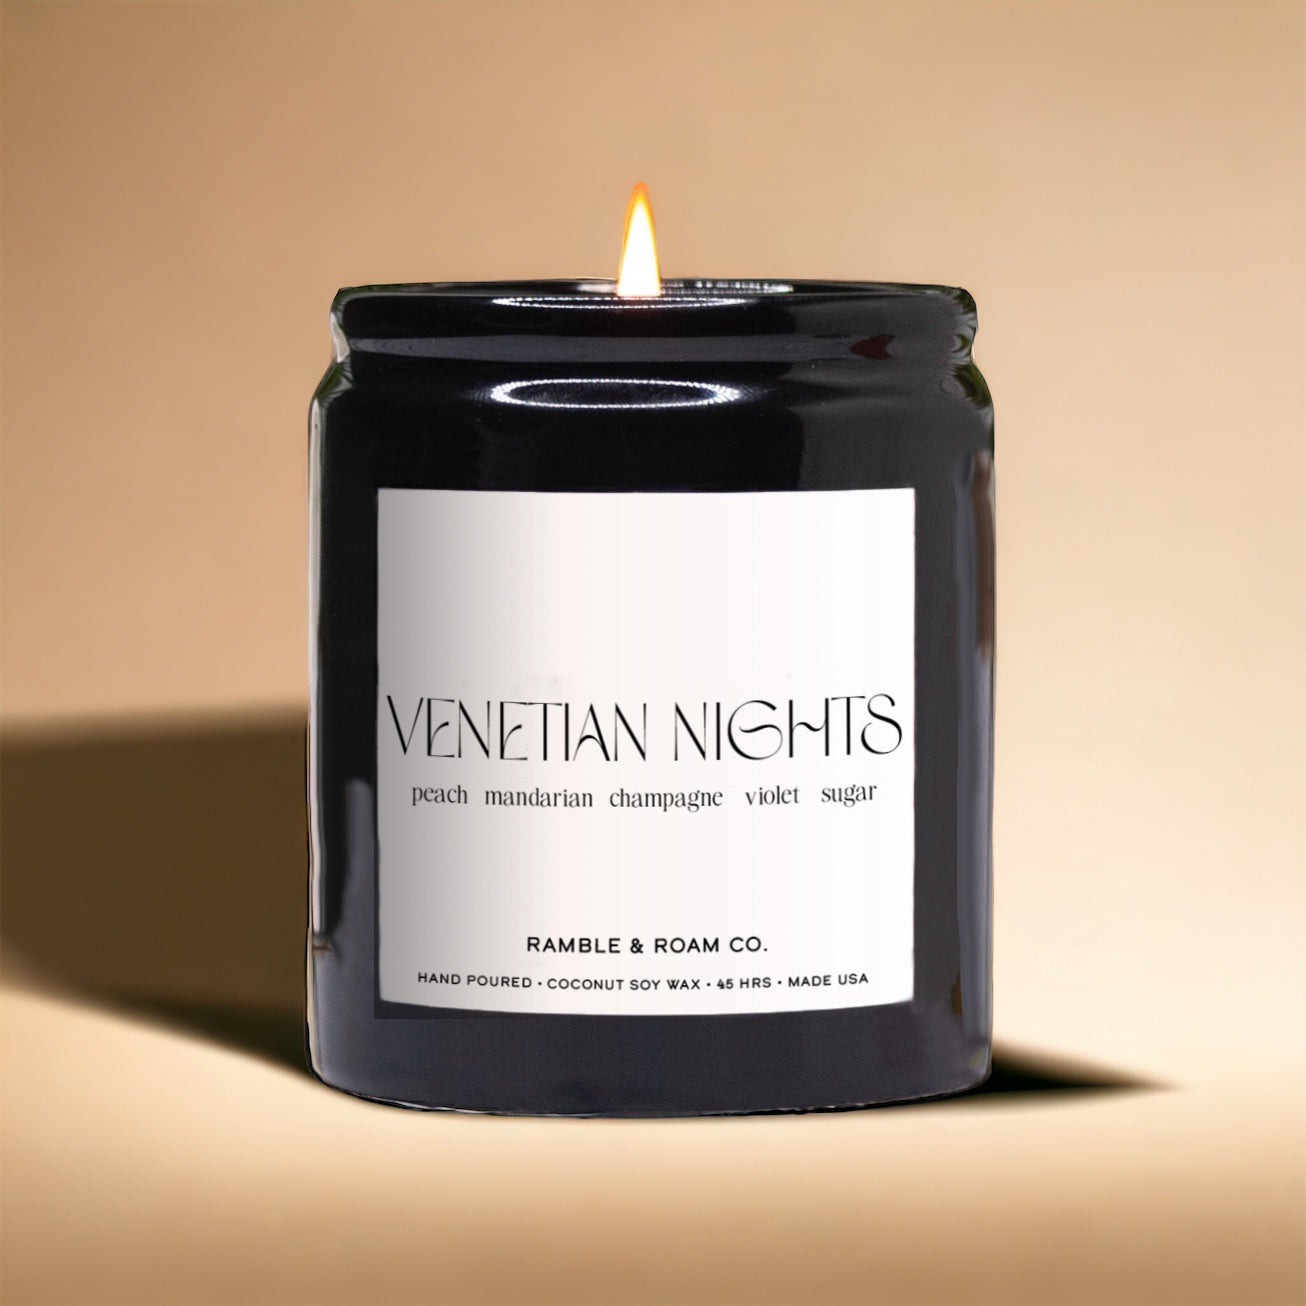 Venetian Nights Candle, Hand-Poured